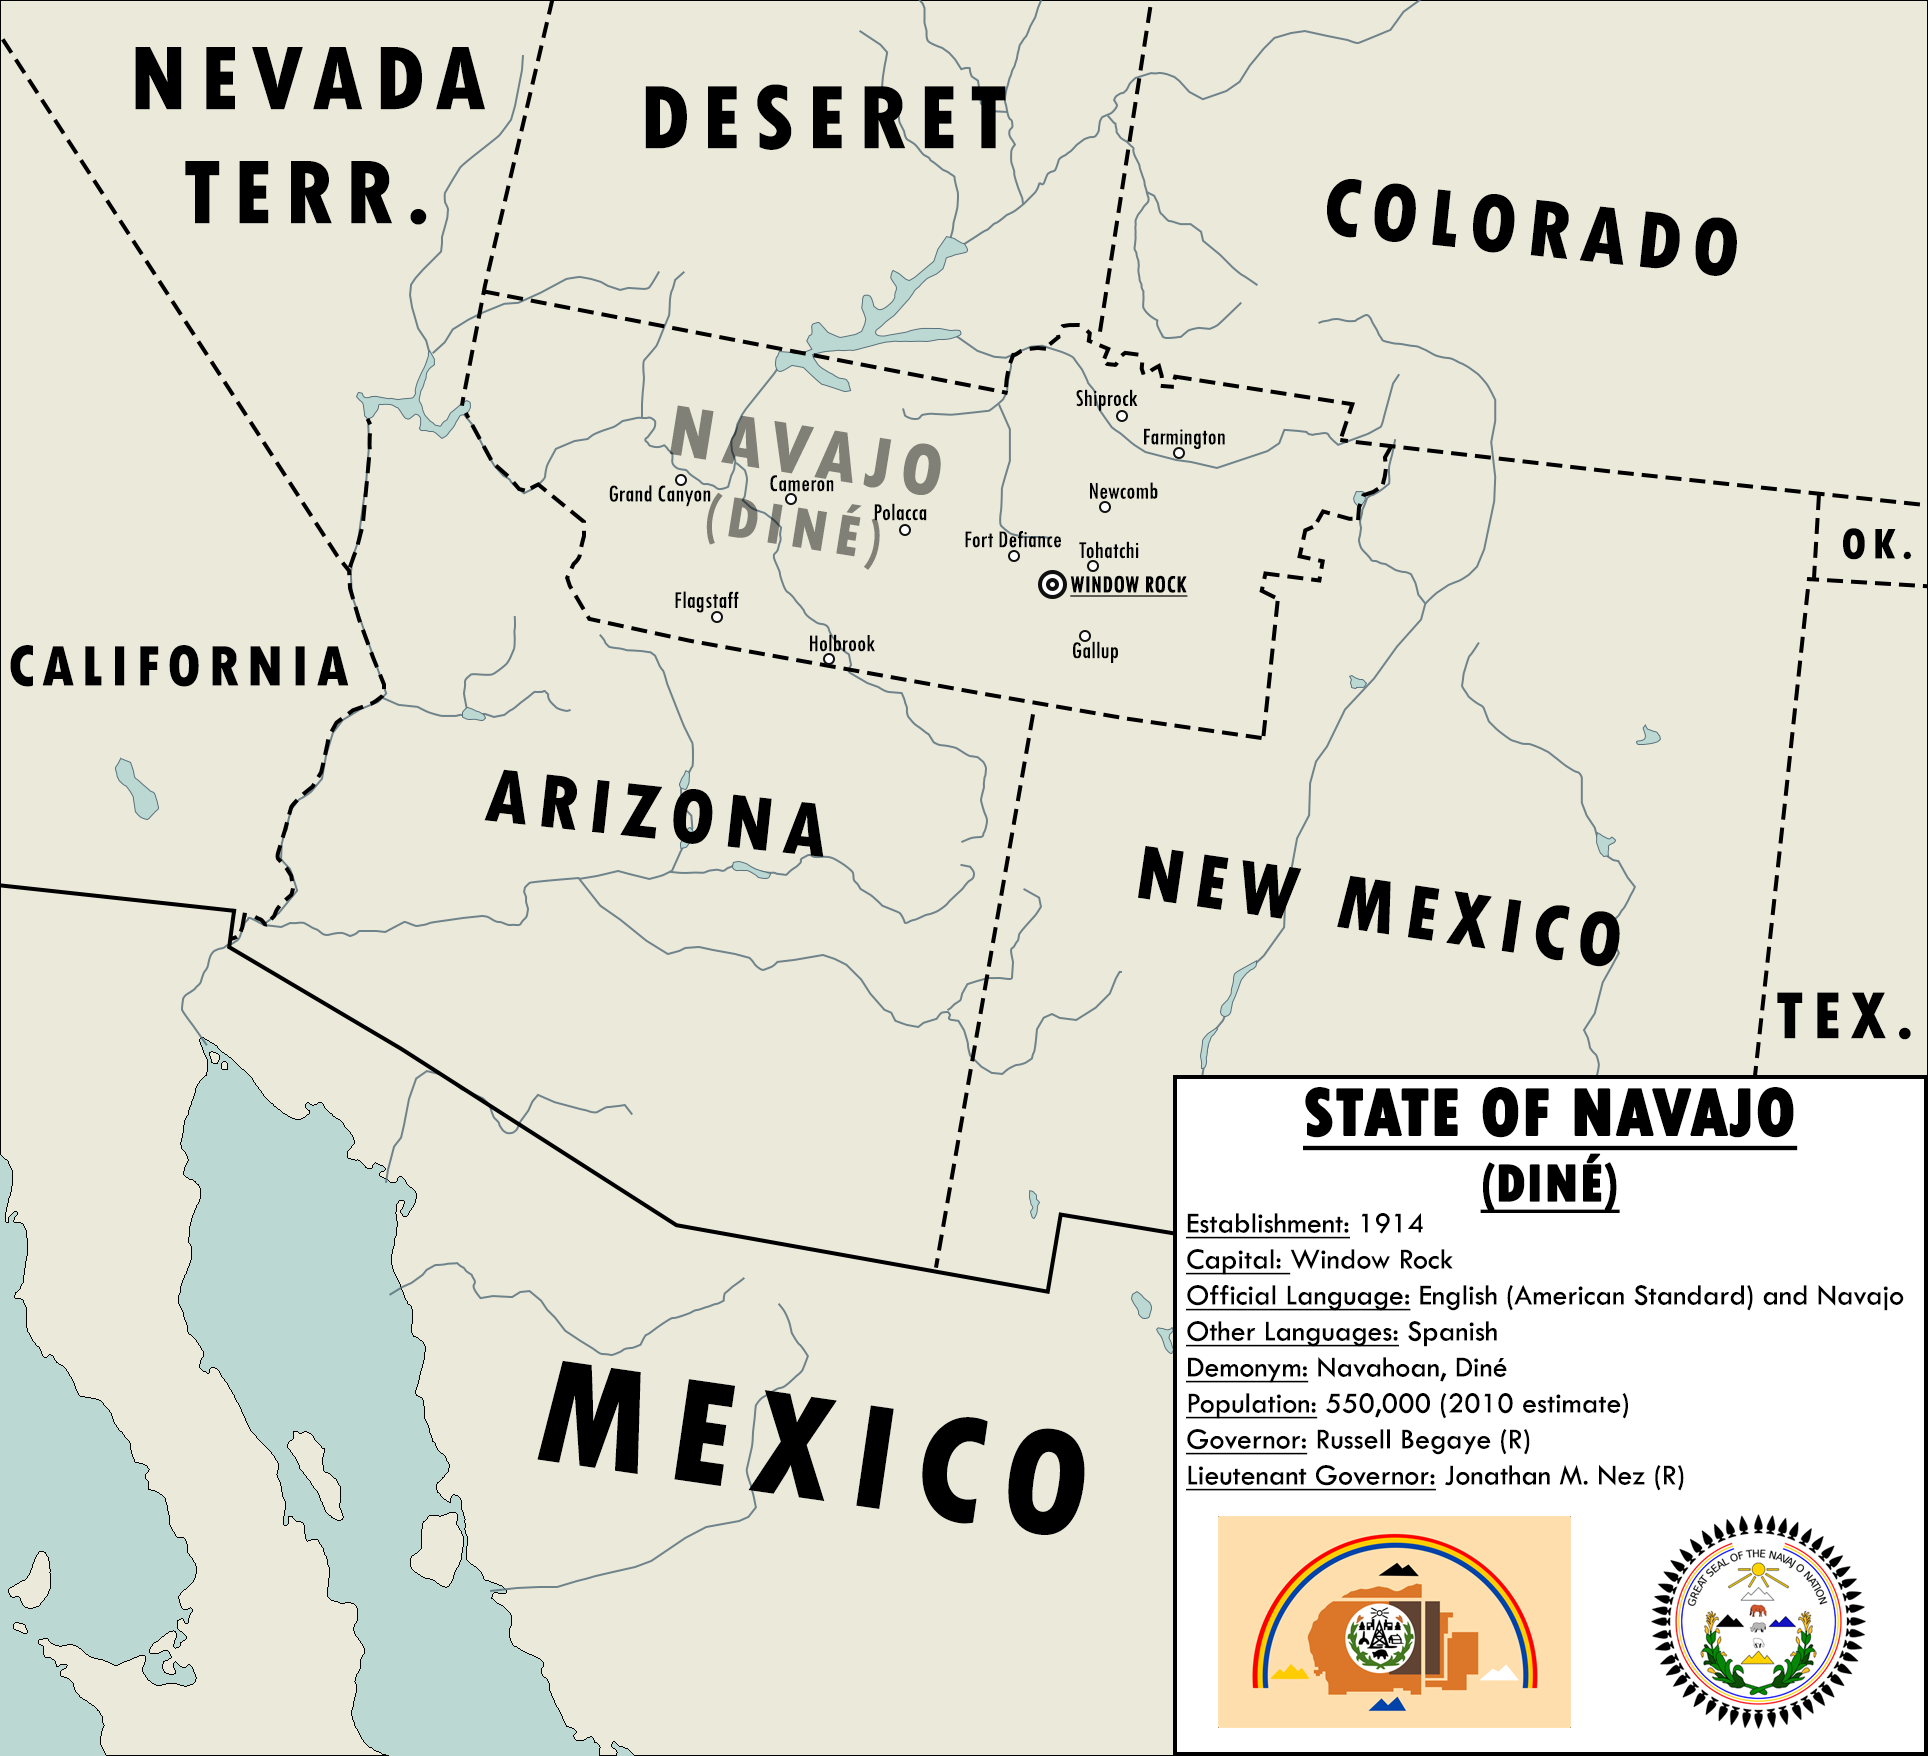 the_state_of_navajo__jefferson_verse__by_kitfisto1997-dc0t7s4.png